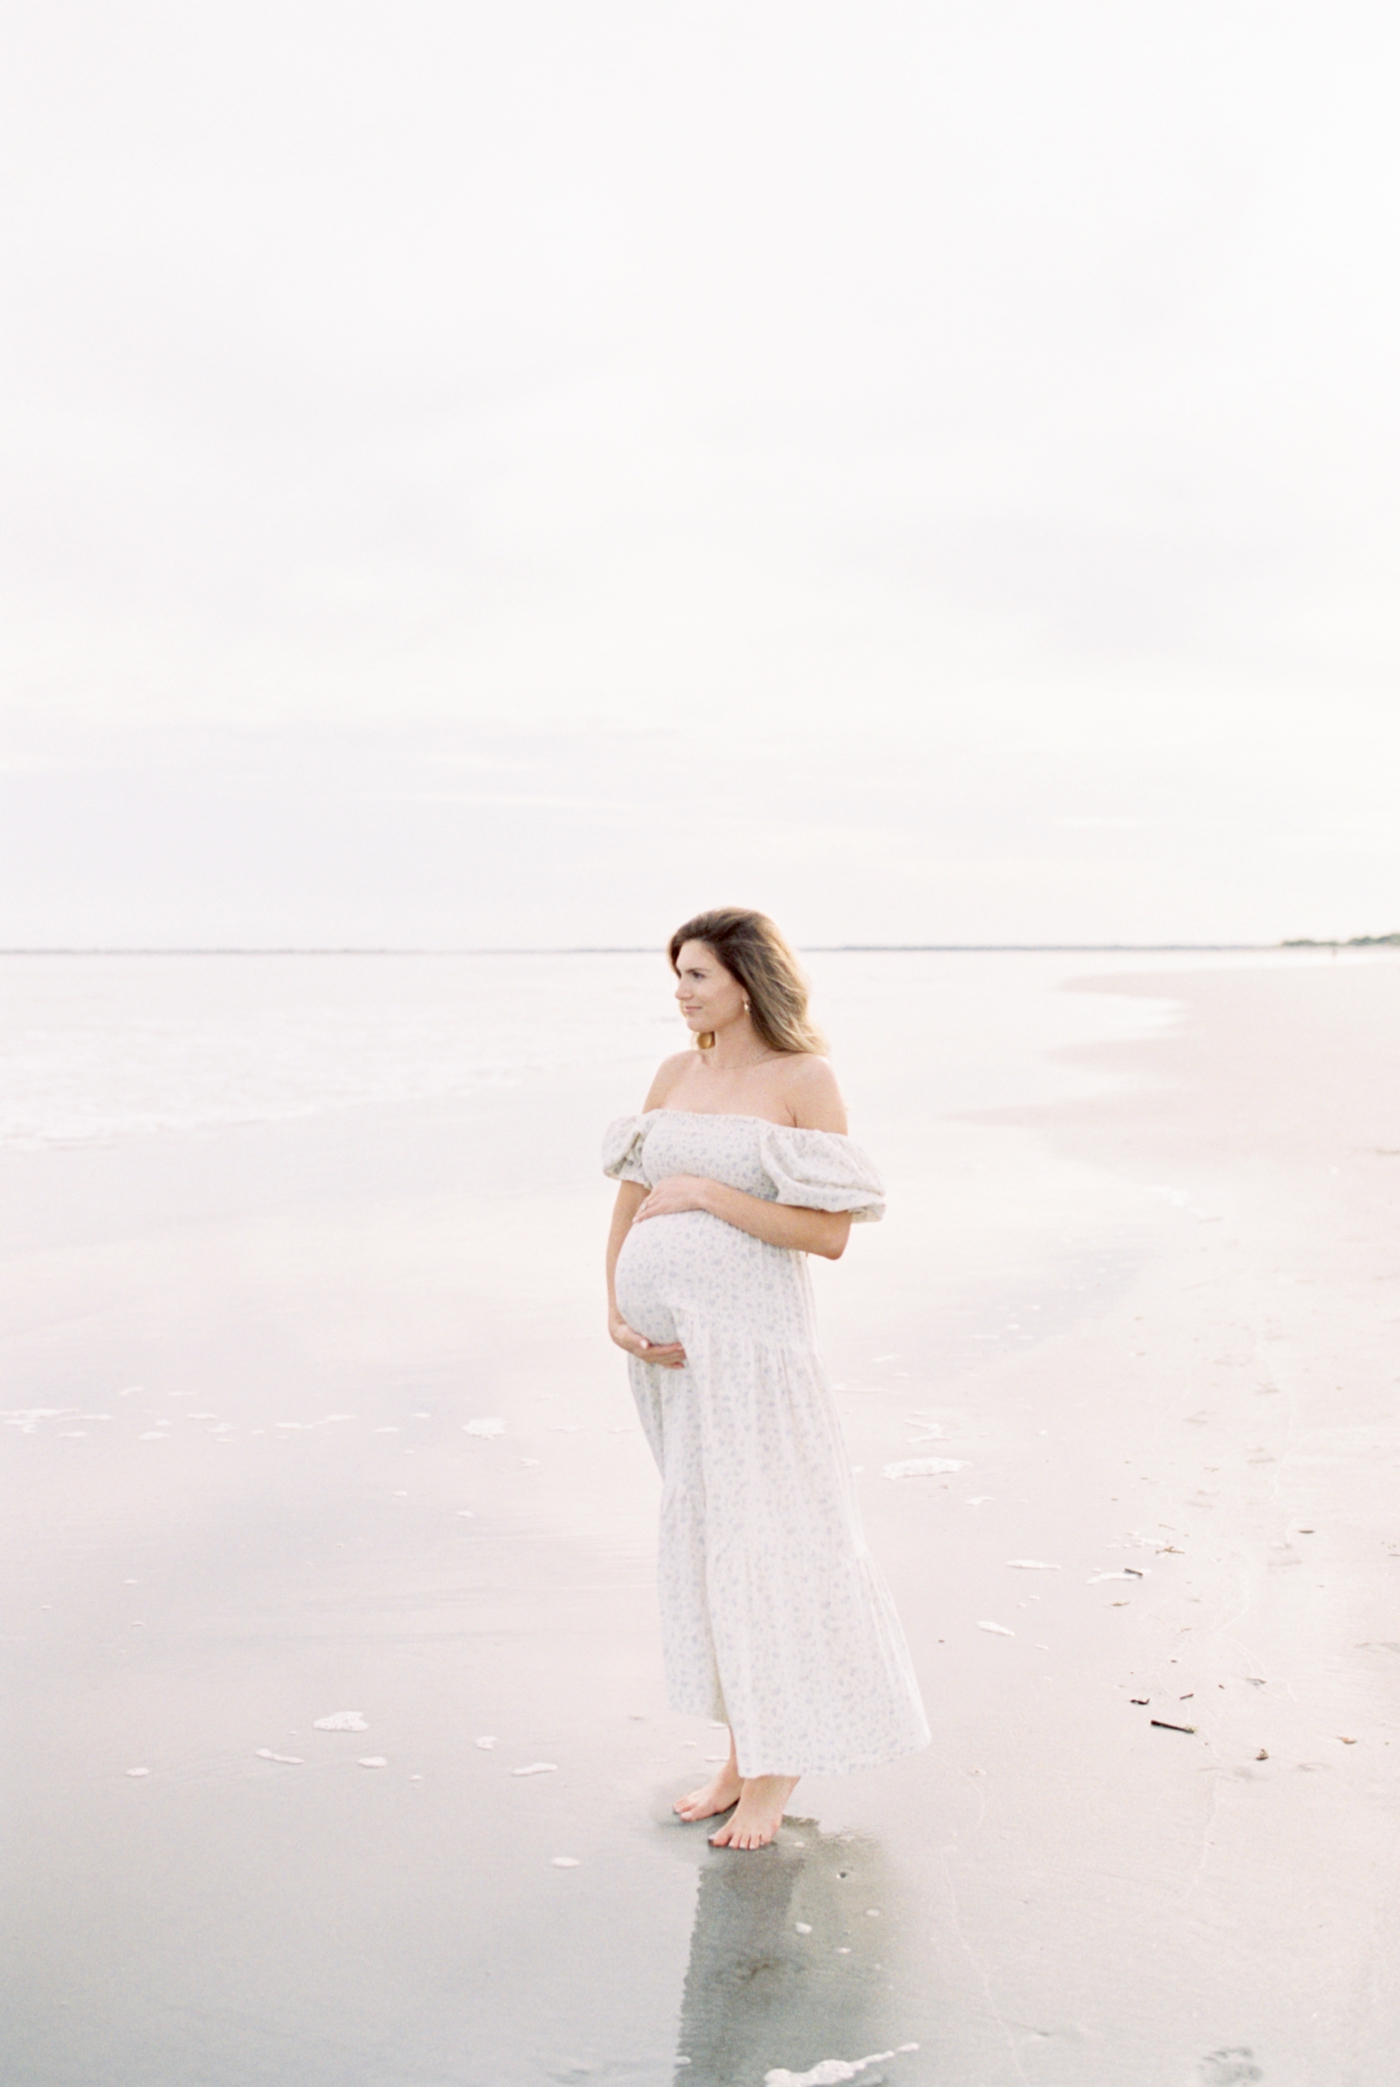 Mother to be cradling her belly looking out at the ocean | Photo by Caitlyn Motycka Photography.